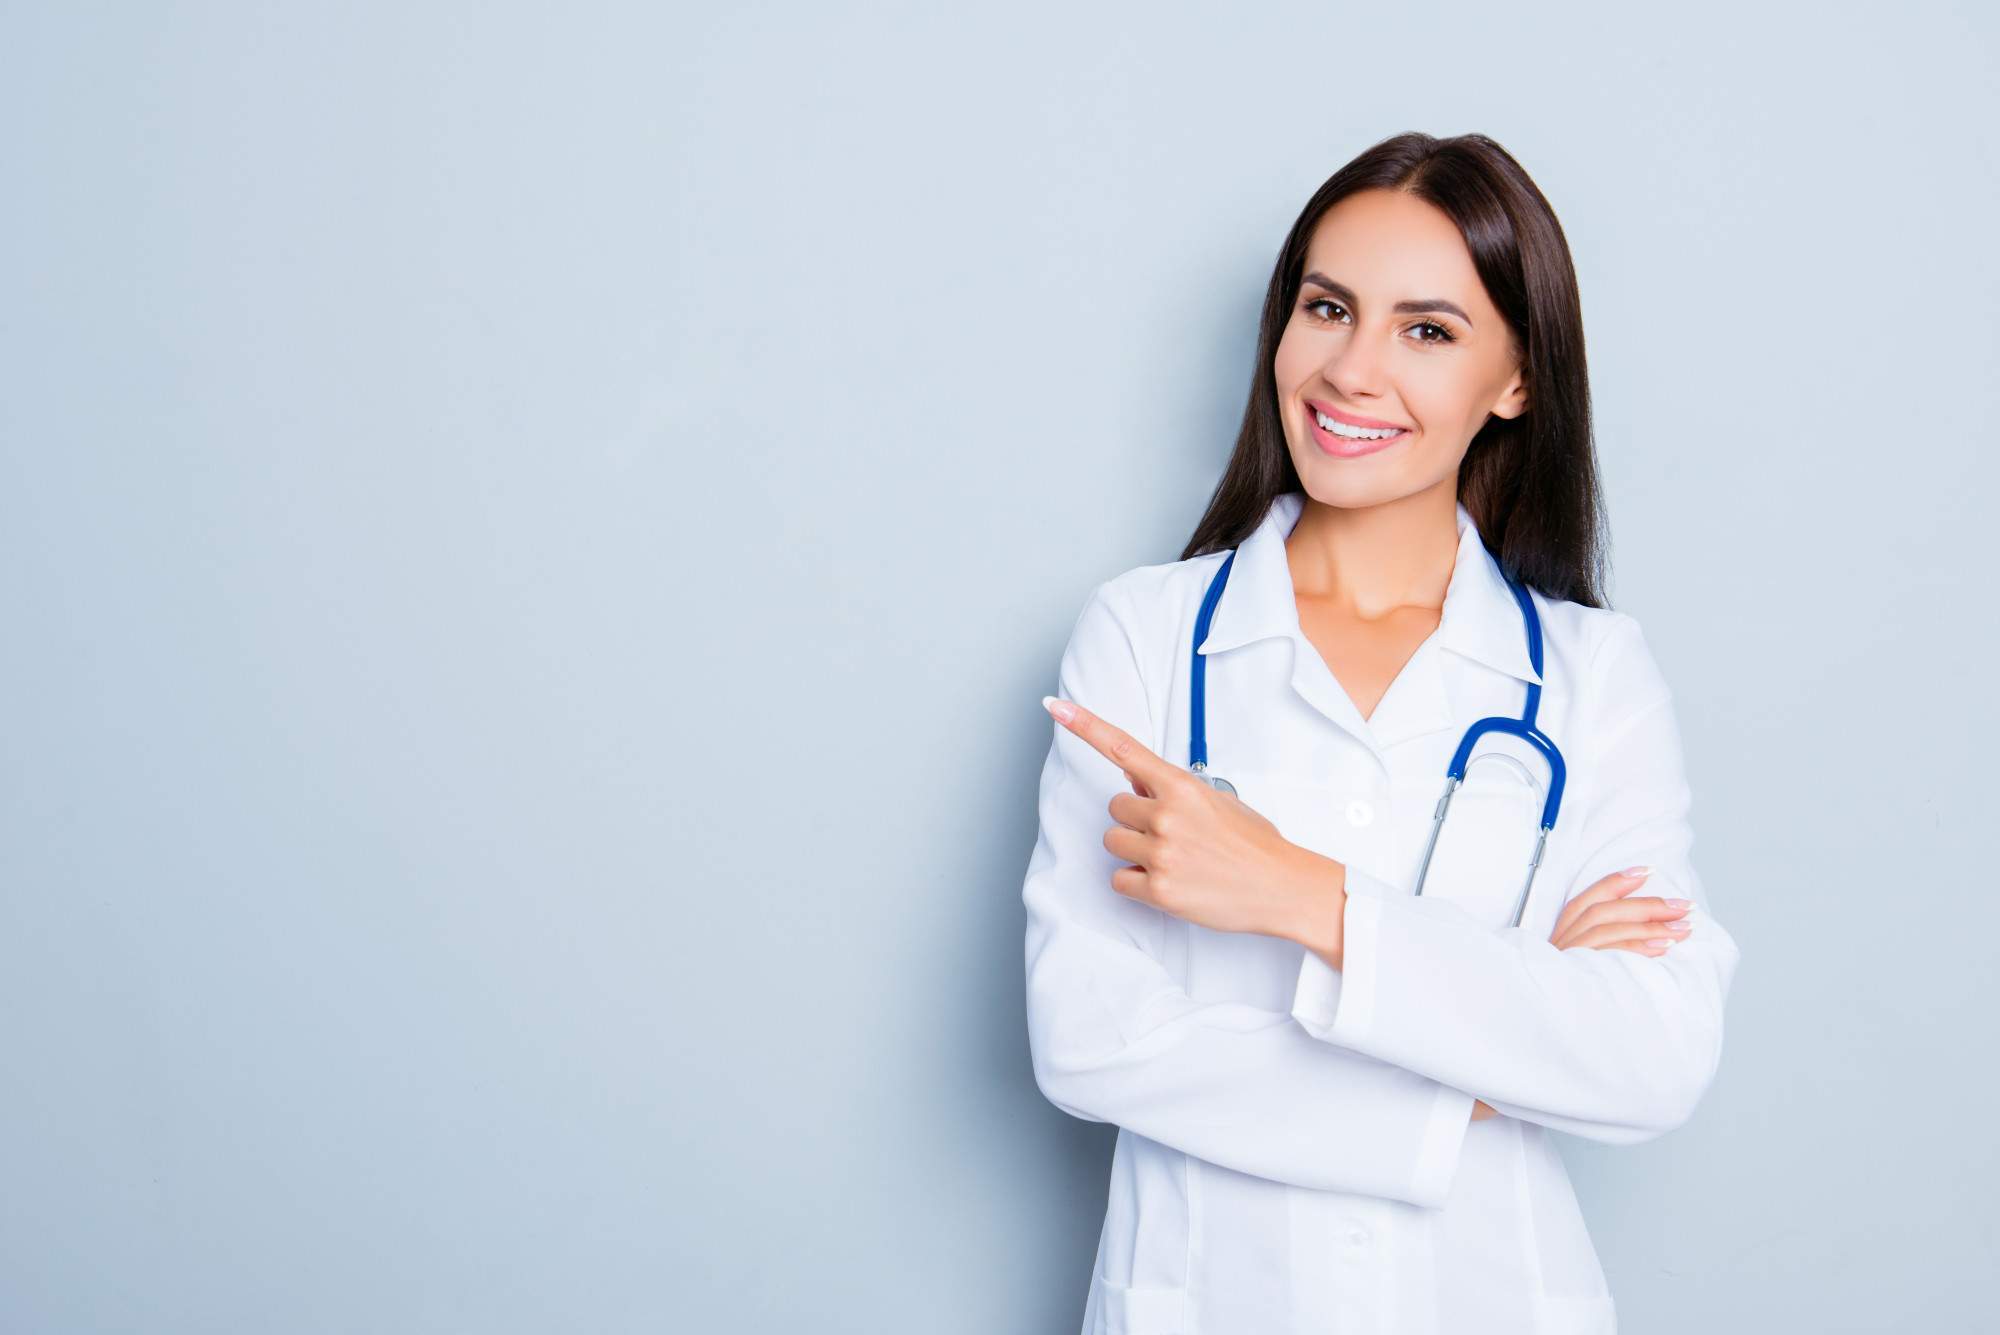 5 Questions to Ask Before Choosing a Primary Care Physician